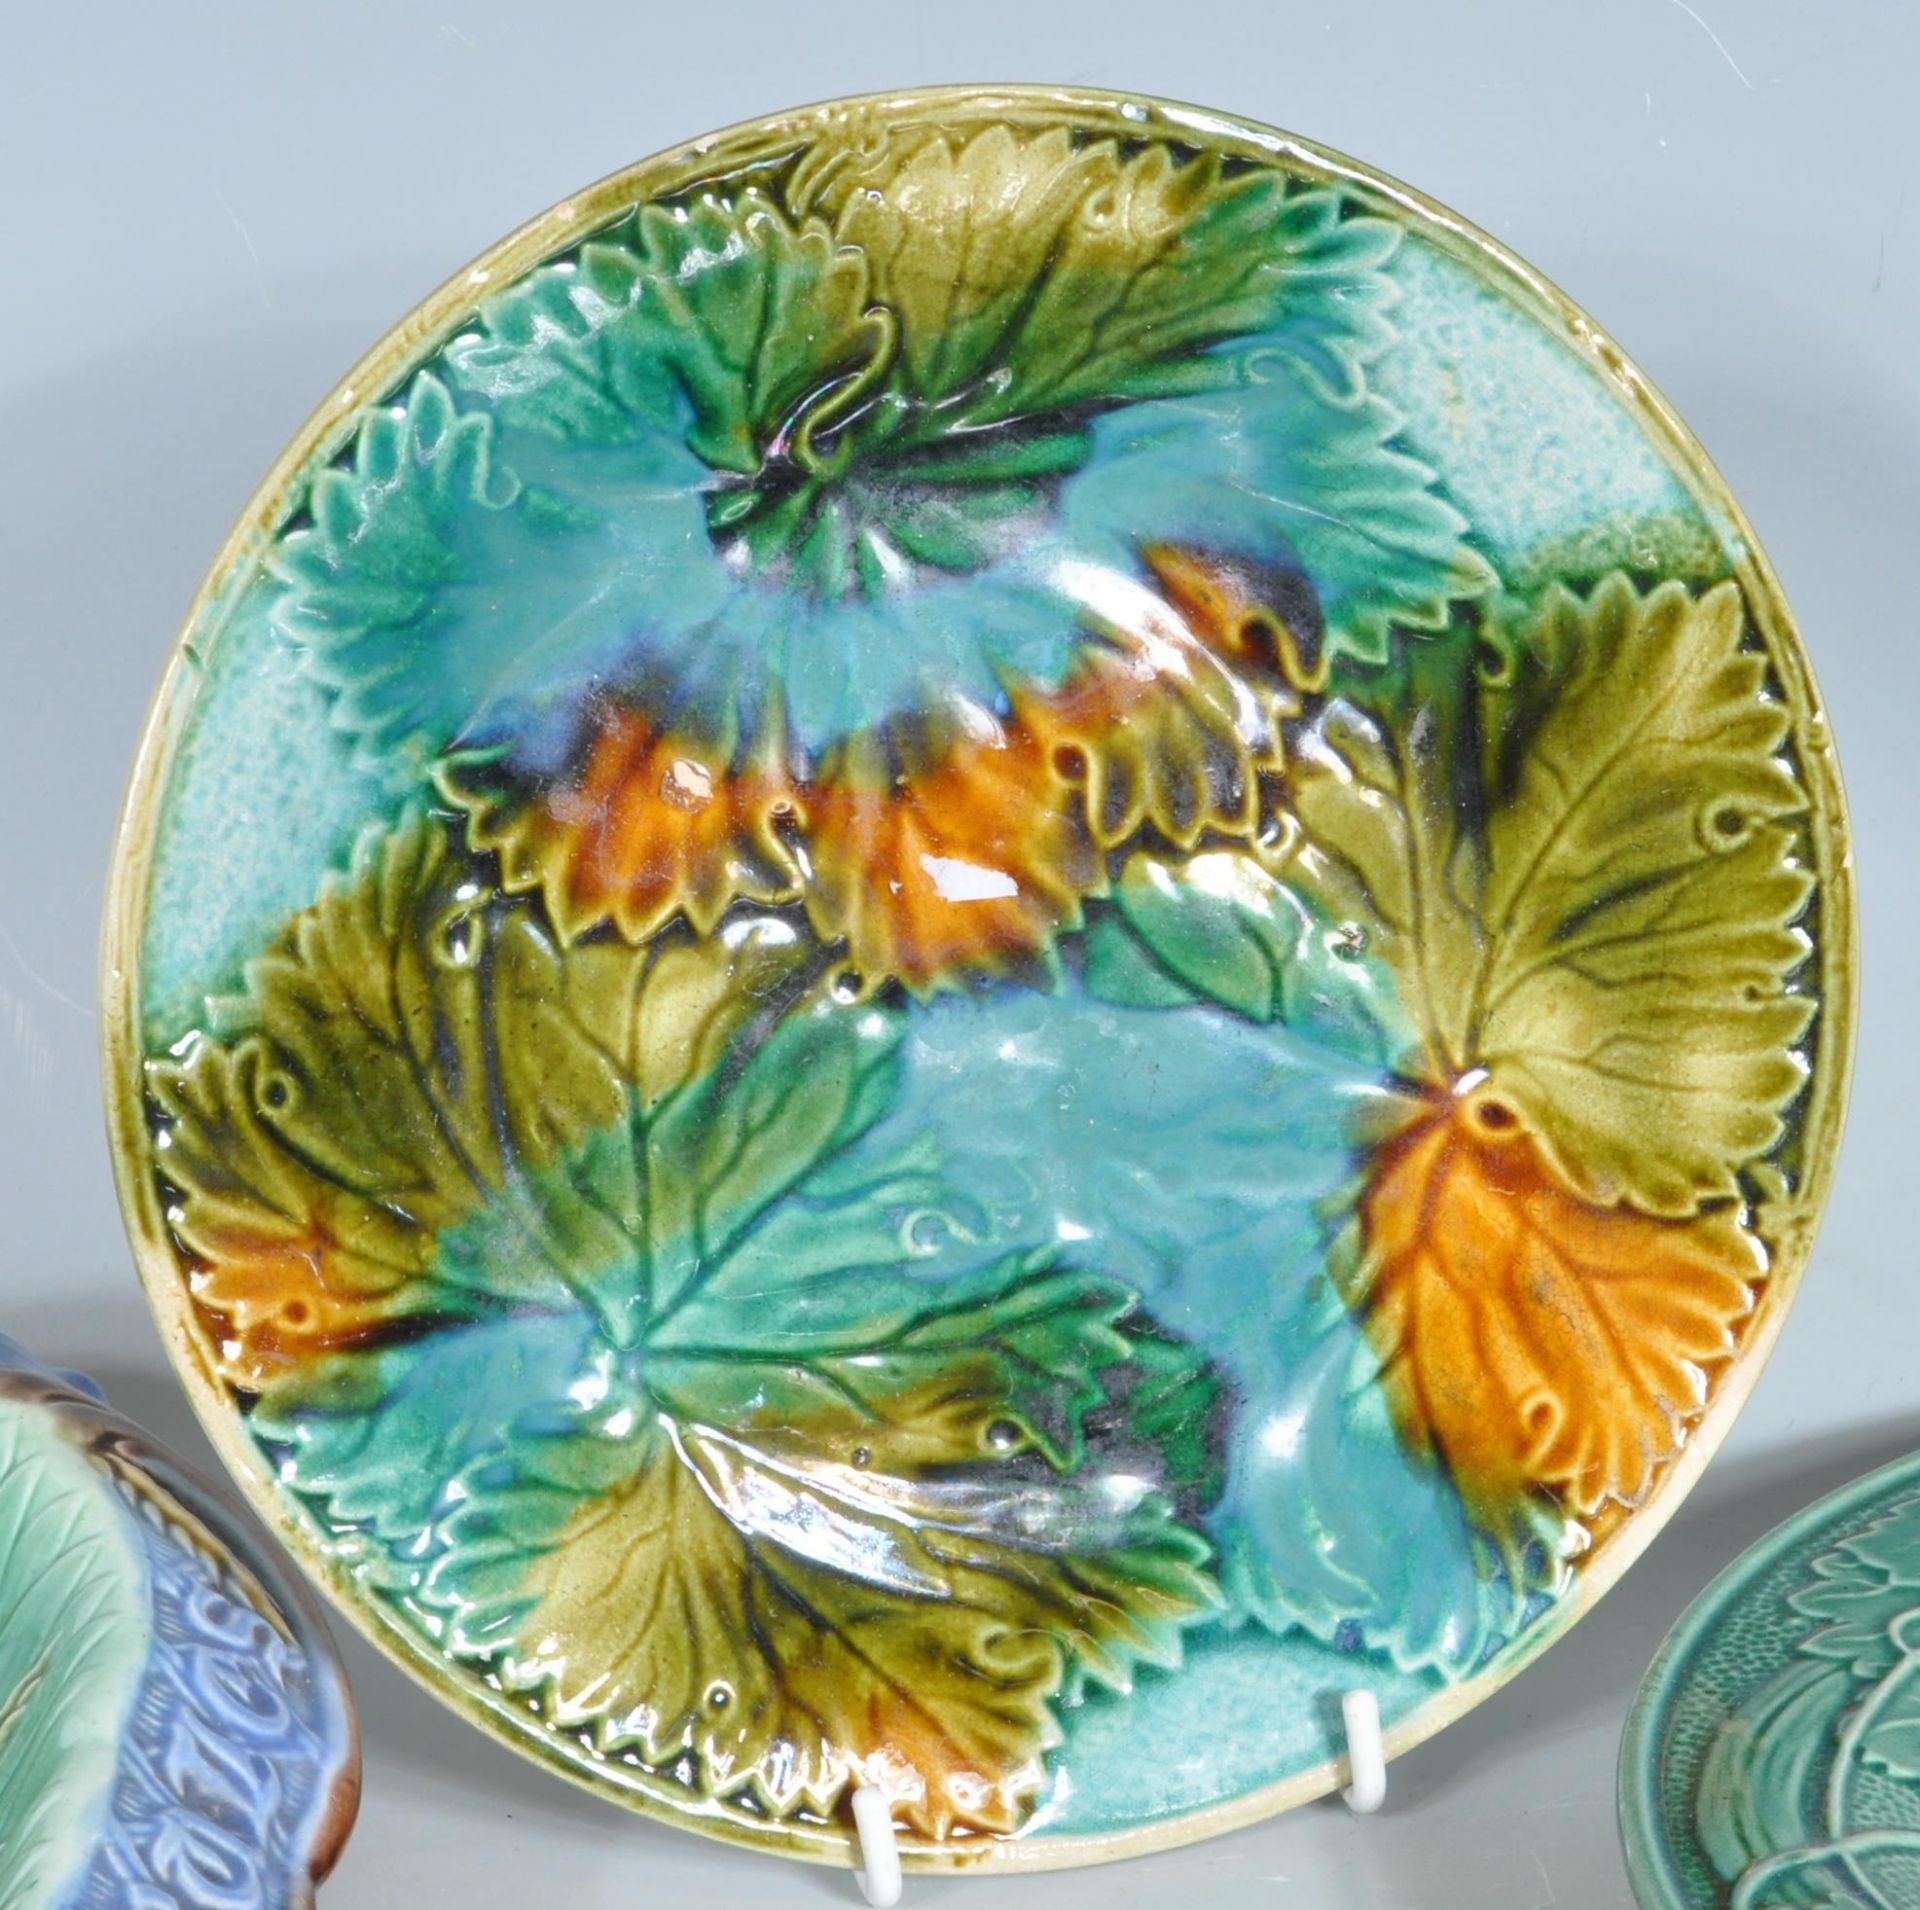 COLLECTION OF VICTORIAN ENGLISH MAJOLICA PLATESA ND DISHES. - Image 2 of 11